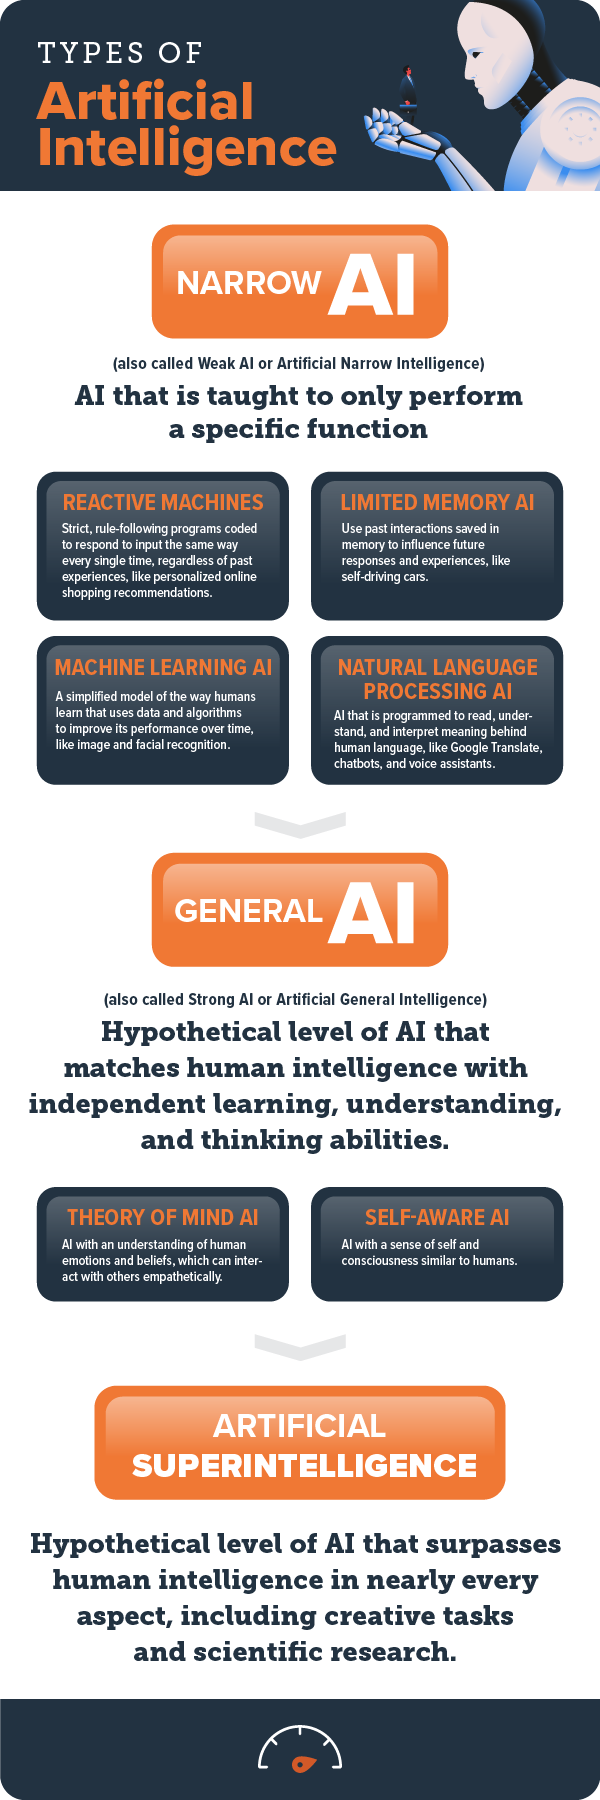 Infographic of types of AI, including narrow and general AI definitions and their subcategories